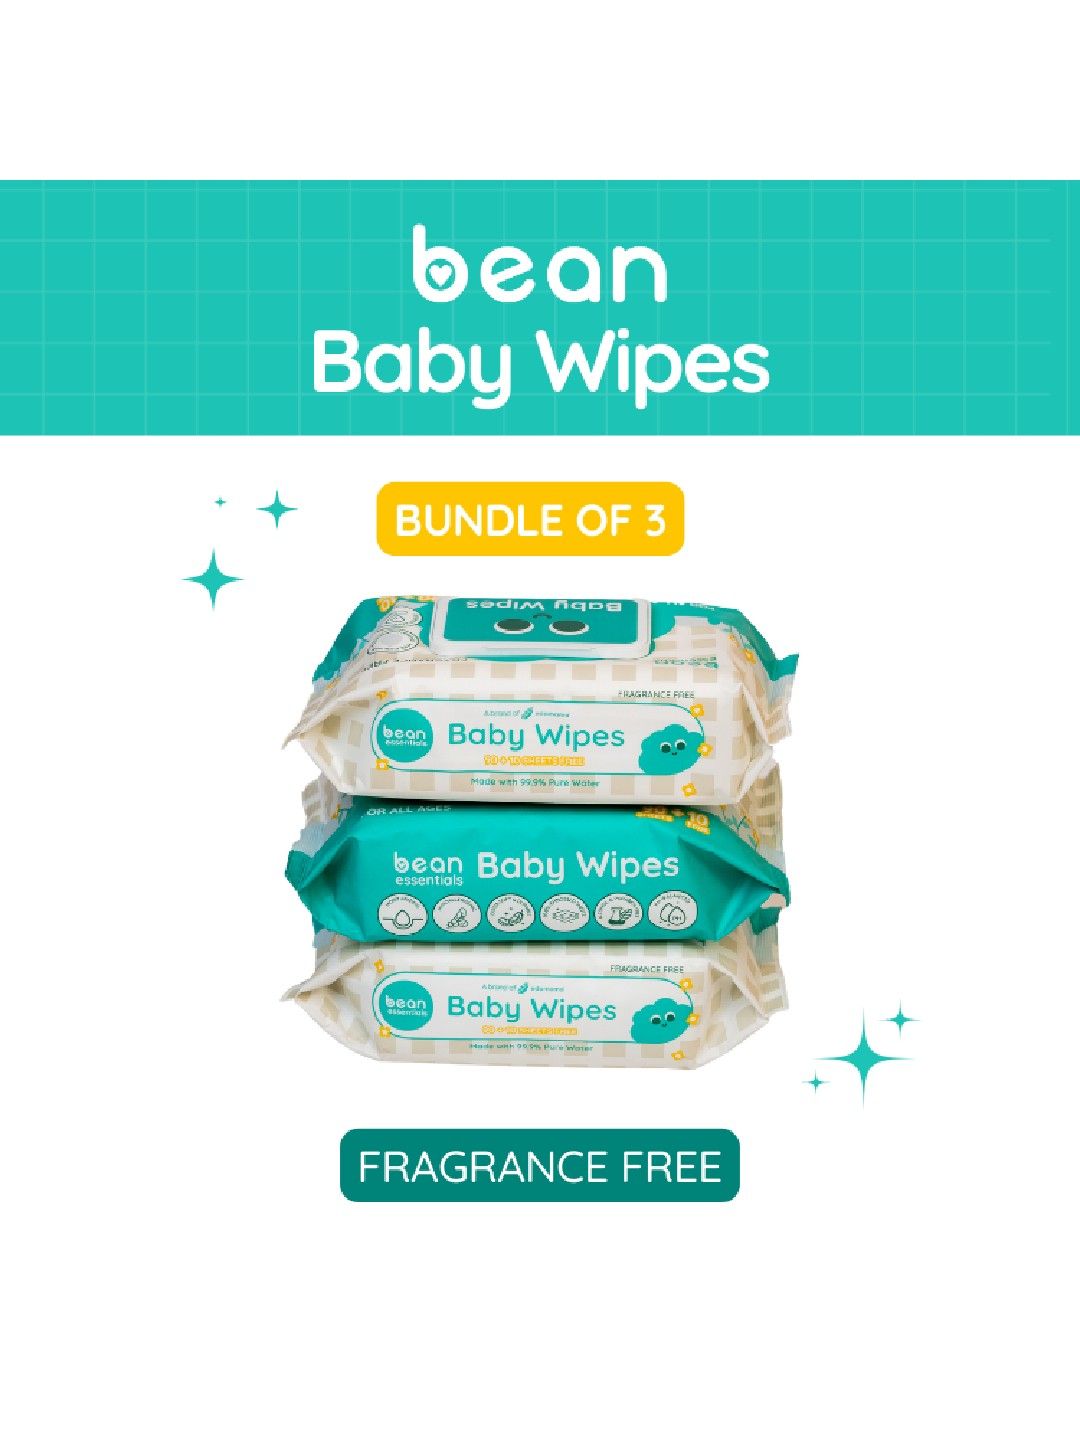 bean essentials [Bundle of 3] Baby Wipes Fragrance Free 3 x 100 sheets